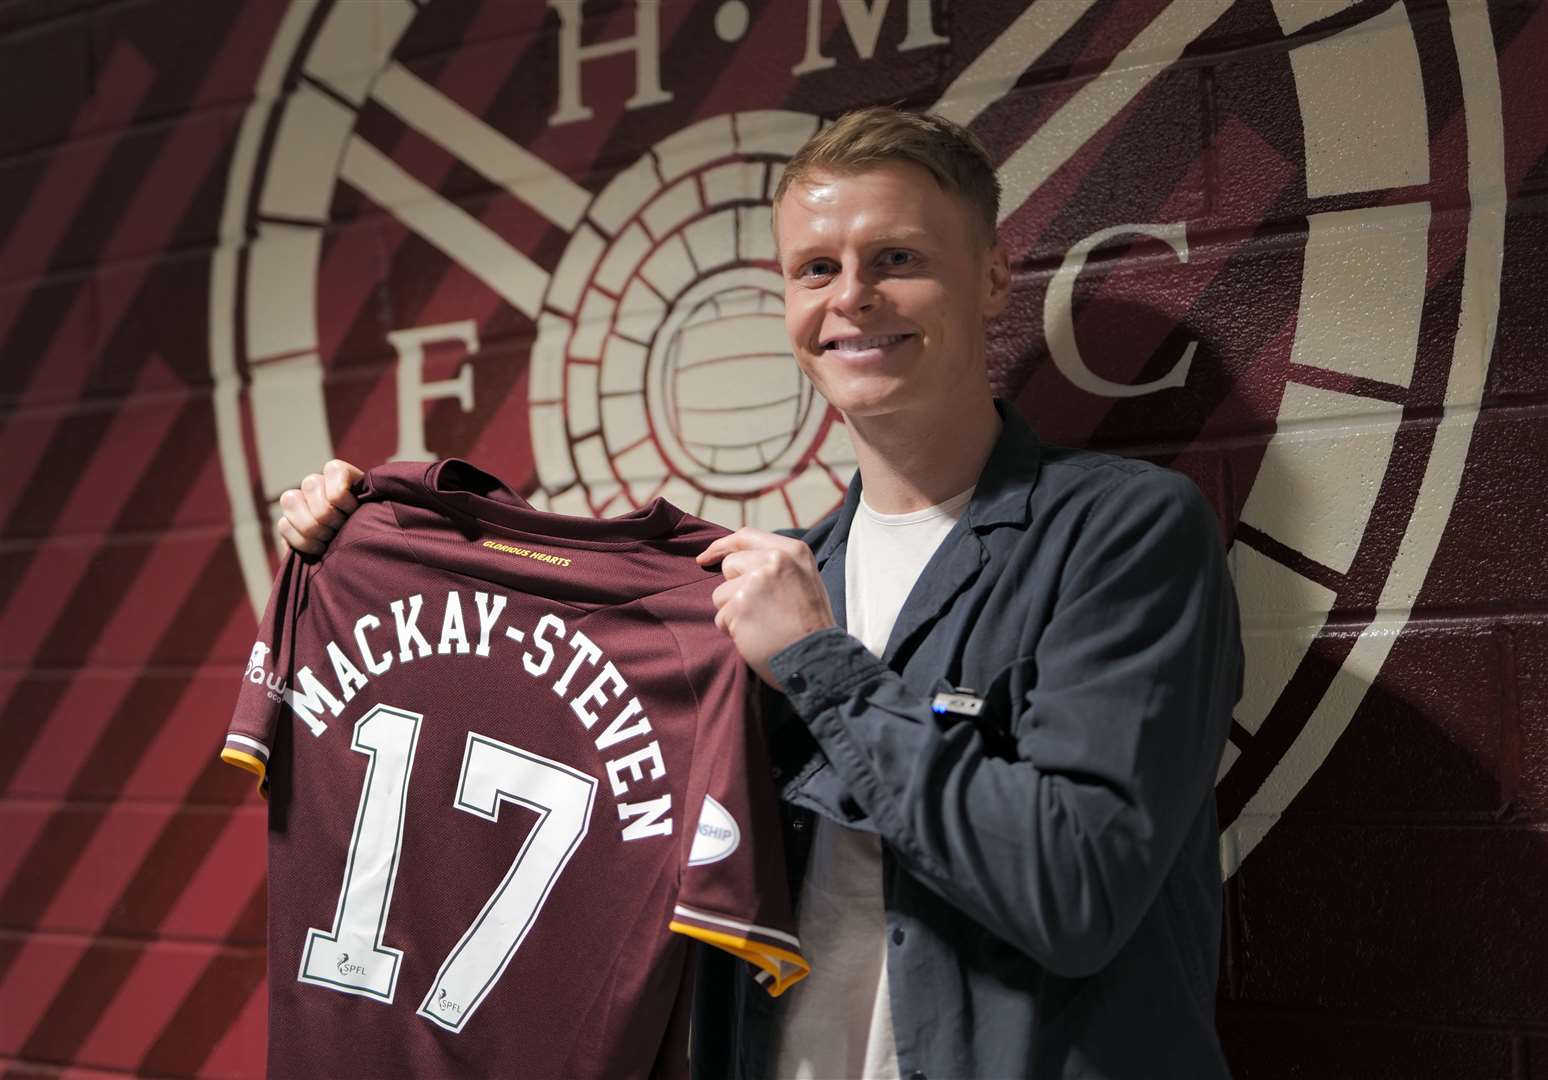 Gary Mackay-Steven has joined Hearts after the end of his spell in Major League Soccer with New York City. Picture: Heart of Midlothian FC